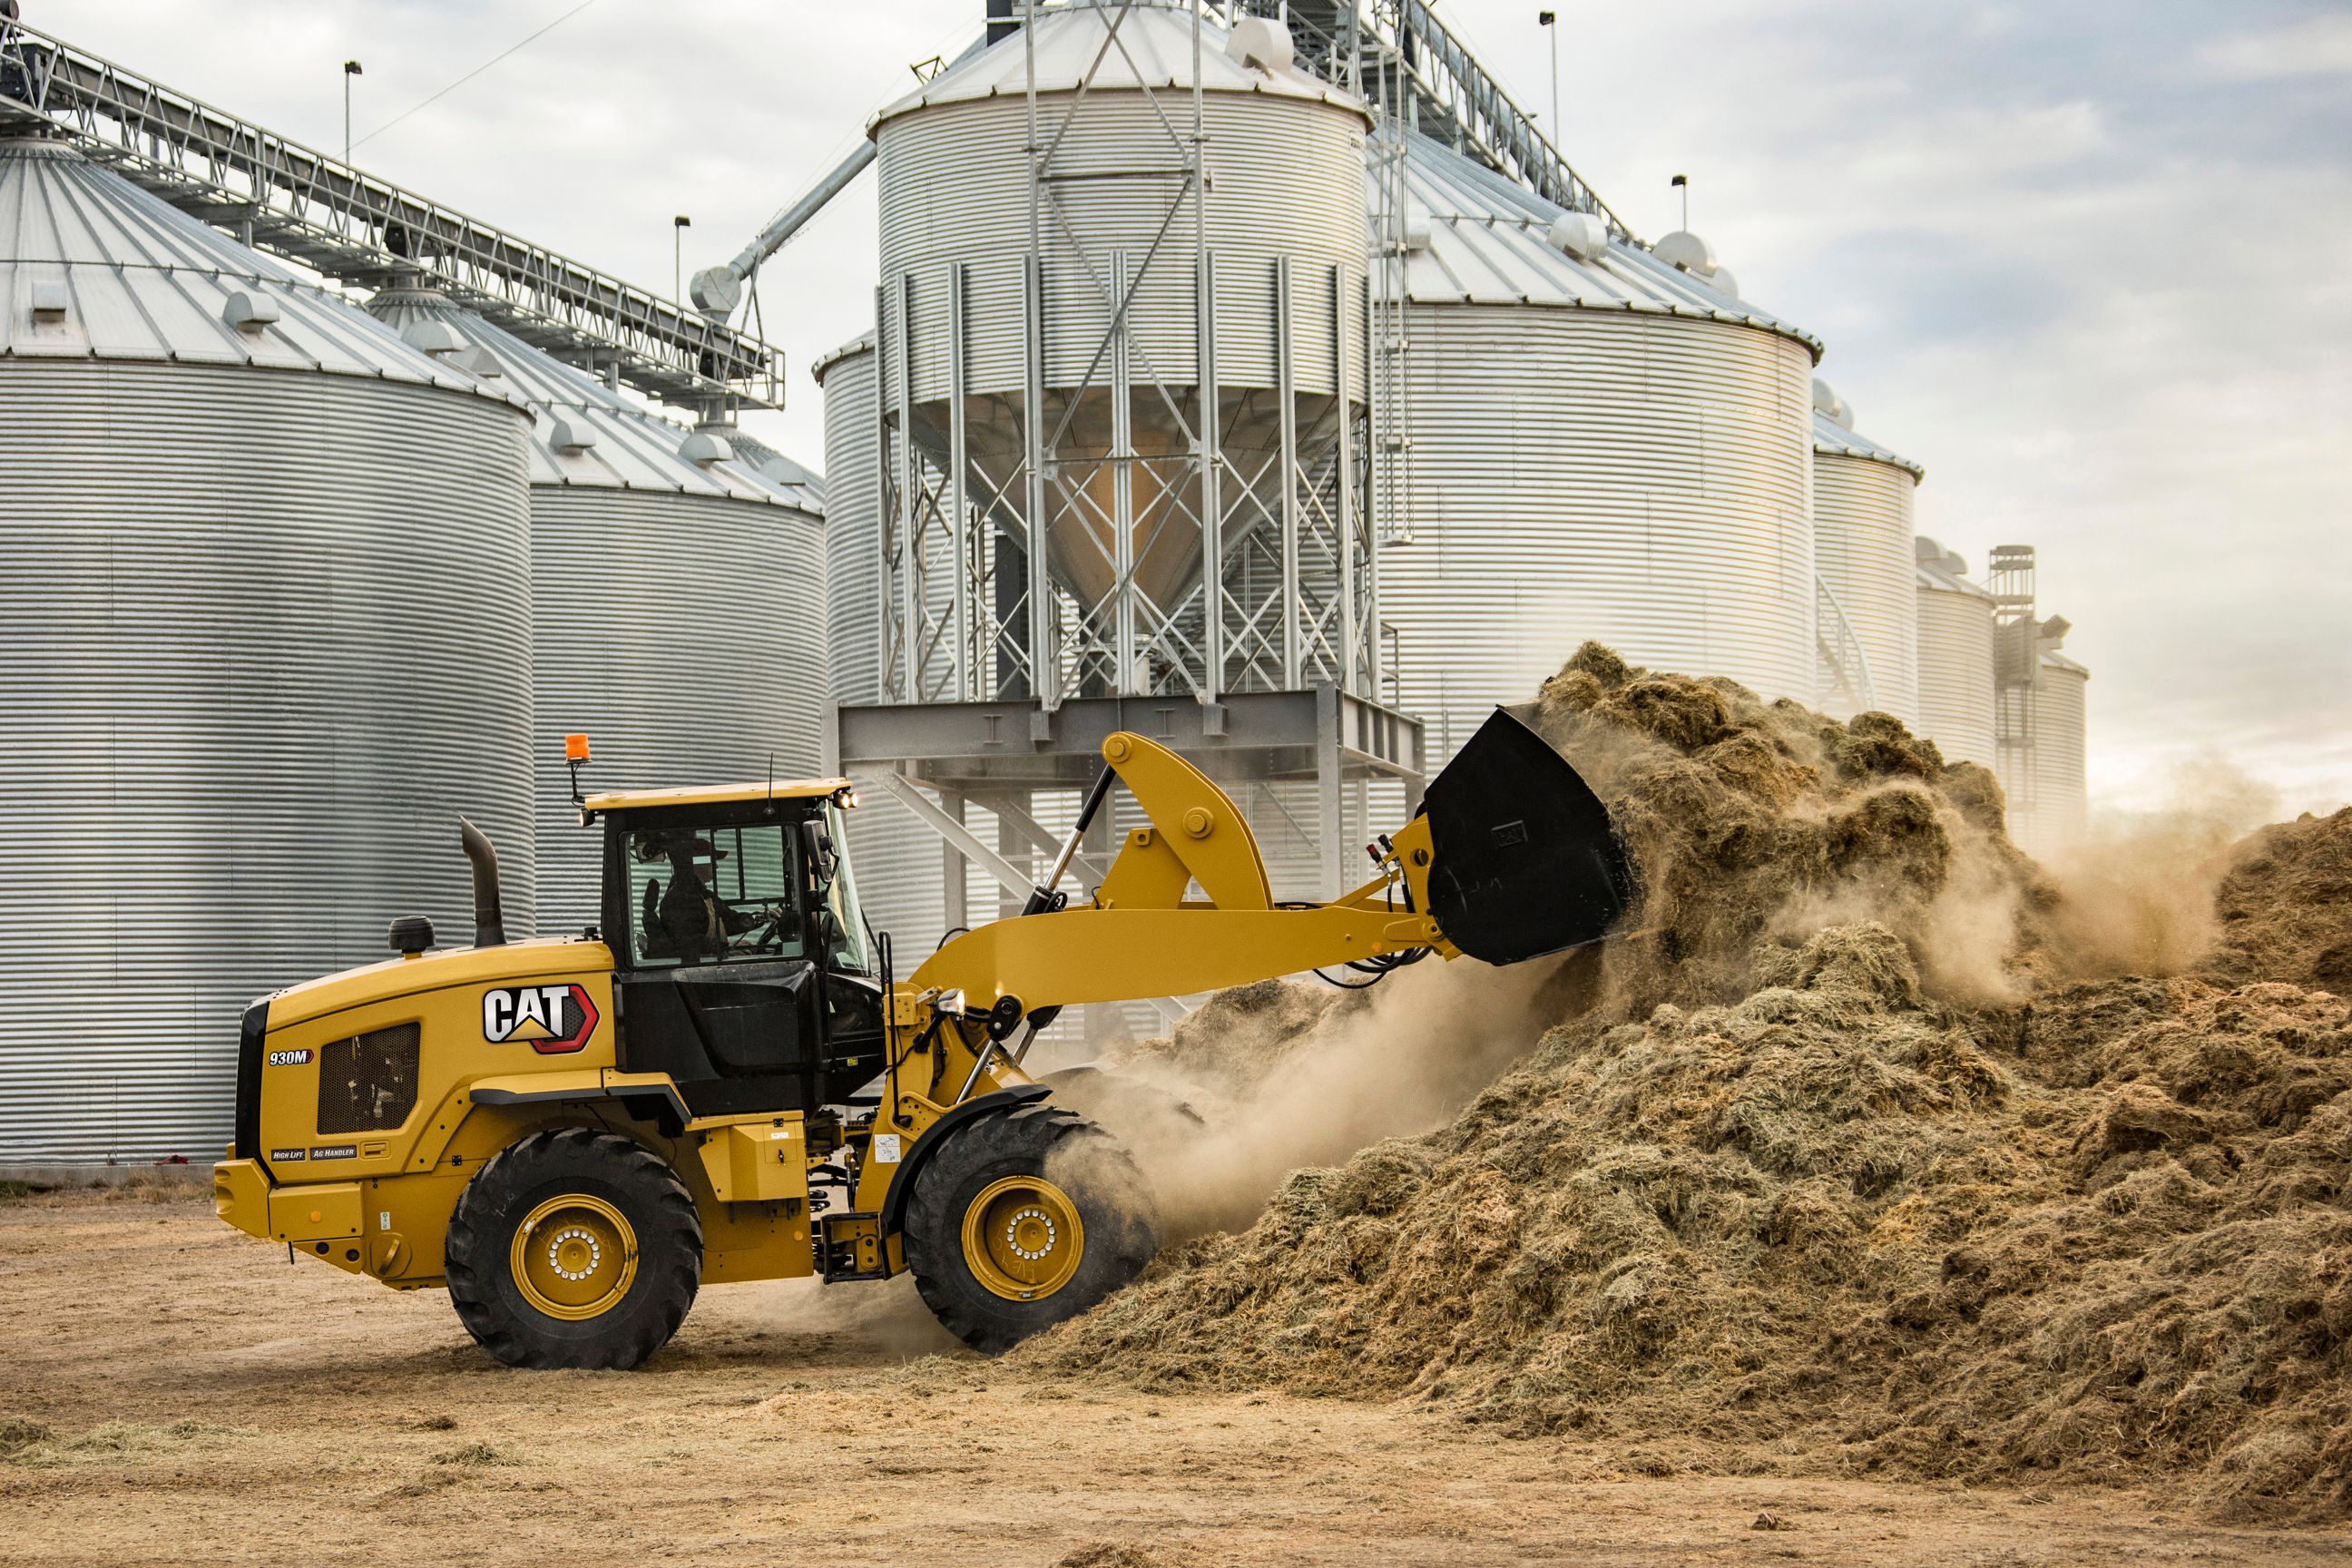 Guide to Choosing the Best Heavy Equipment for Farming